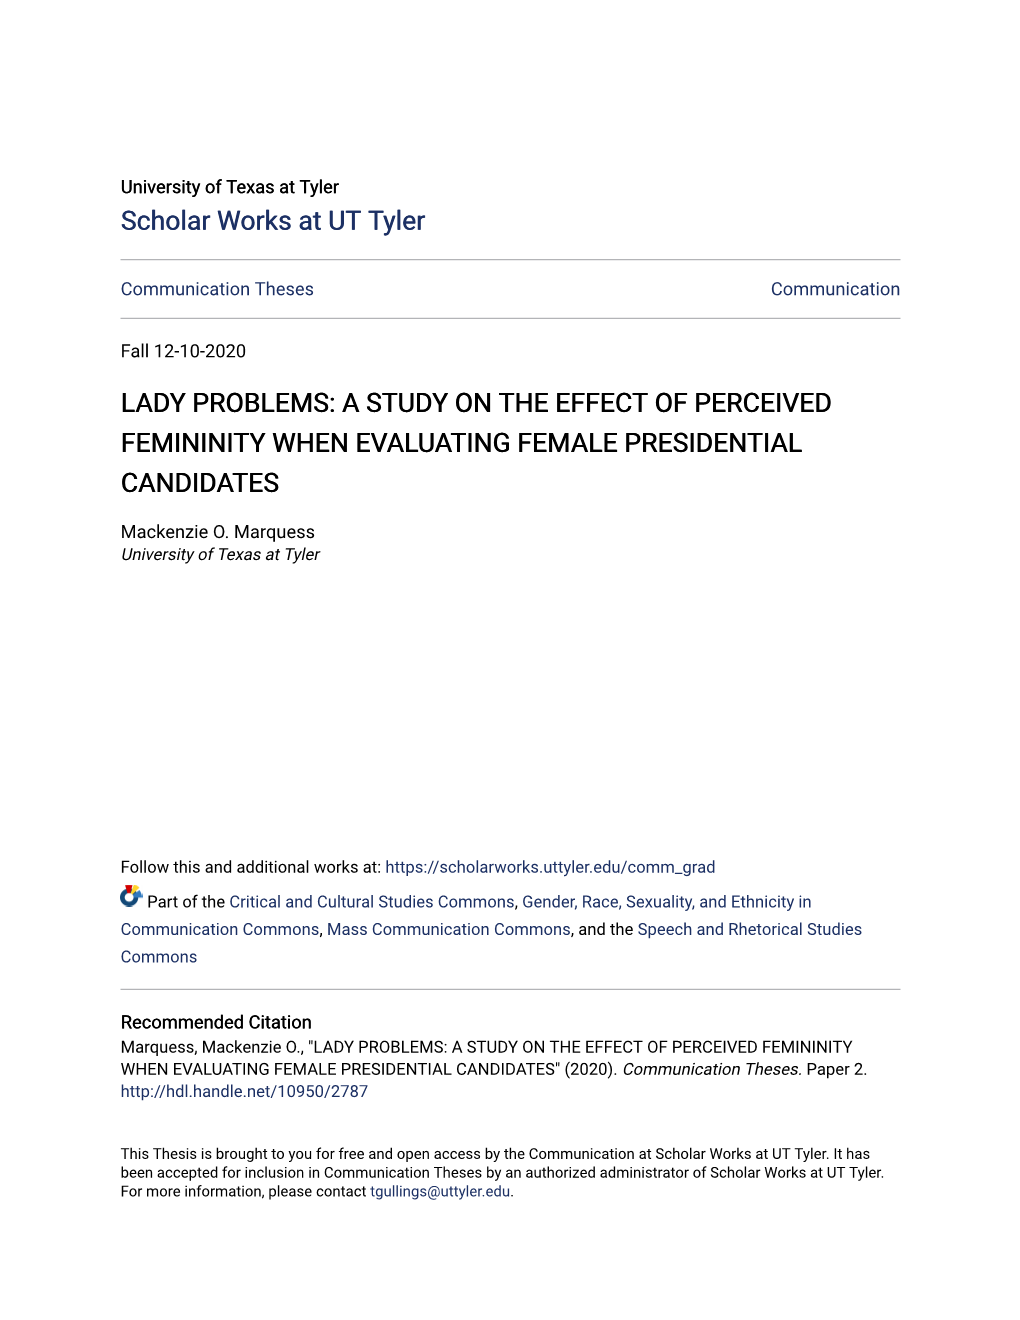 Lady Problems: a Study on the Effect of Perceived Femininity When Evaluating Female Presidential Candidates